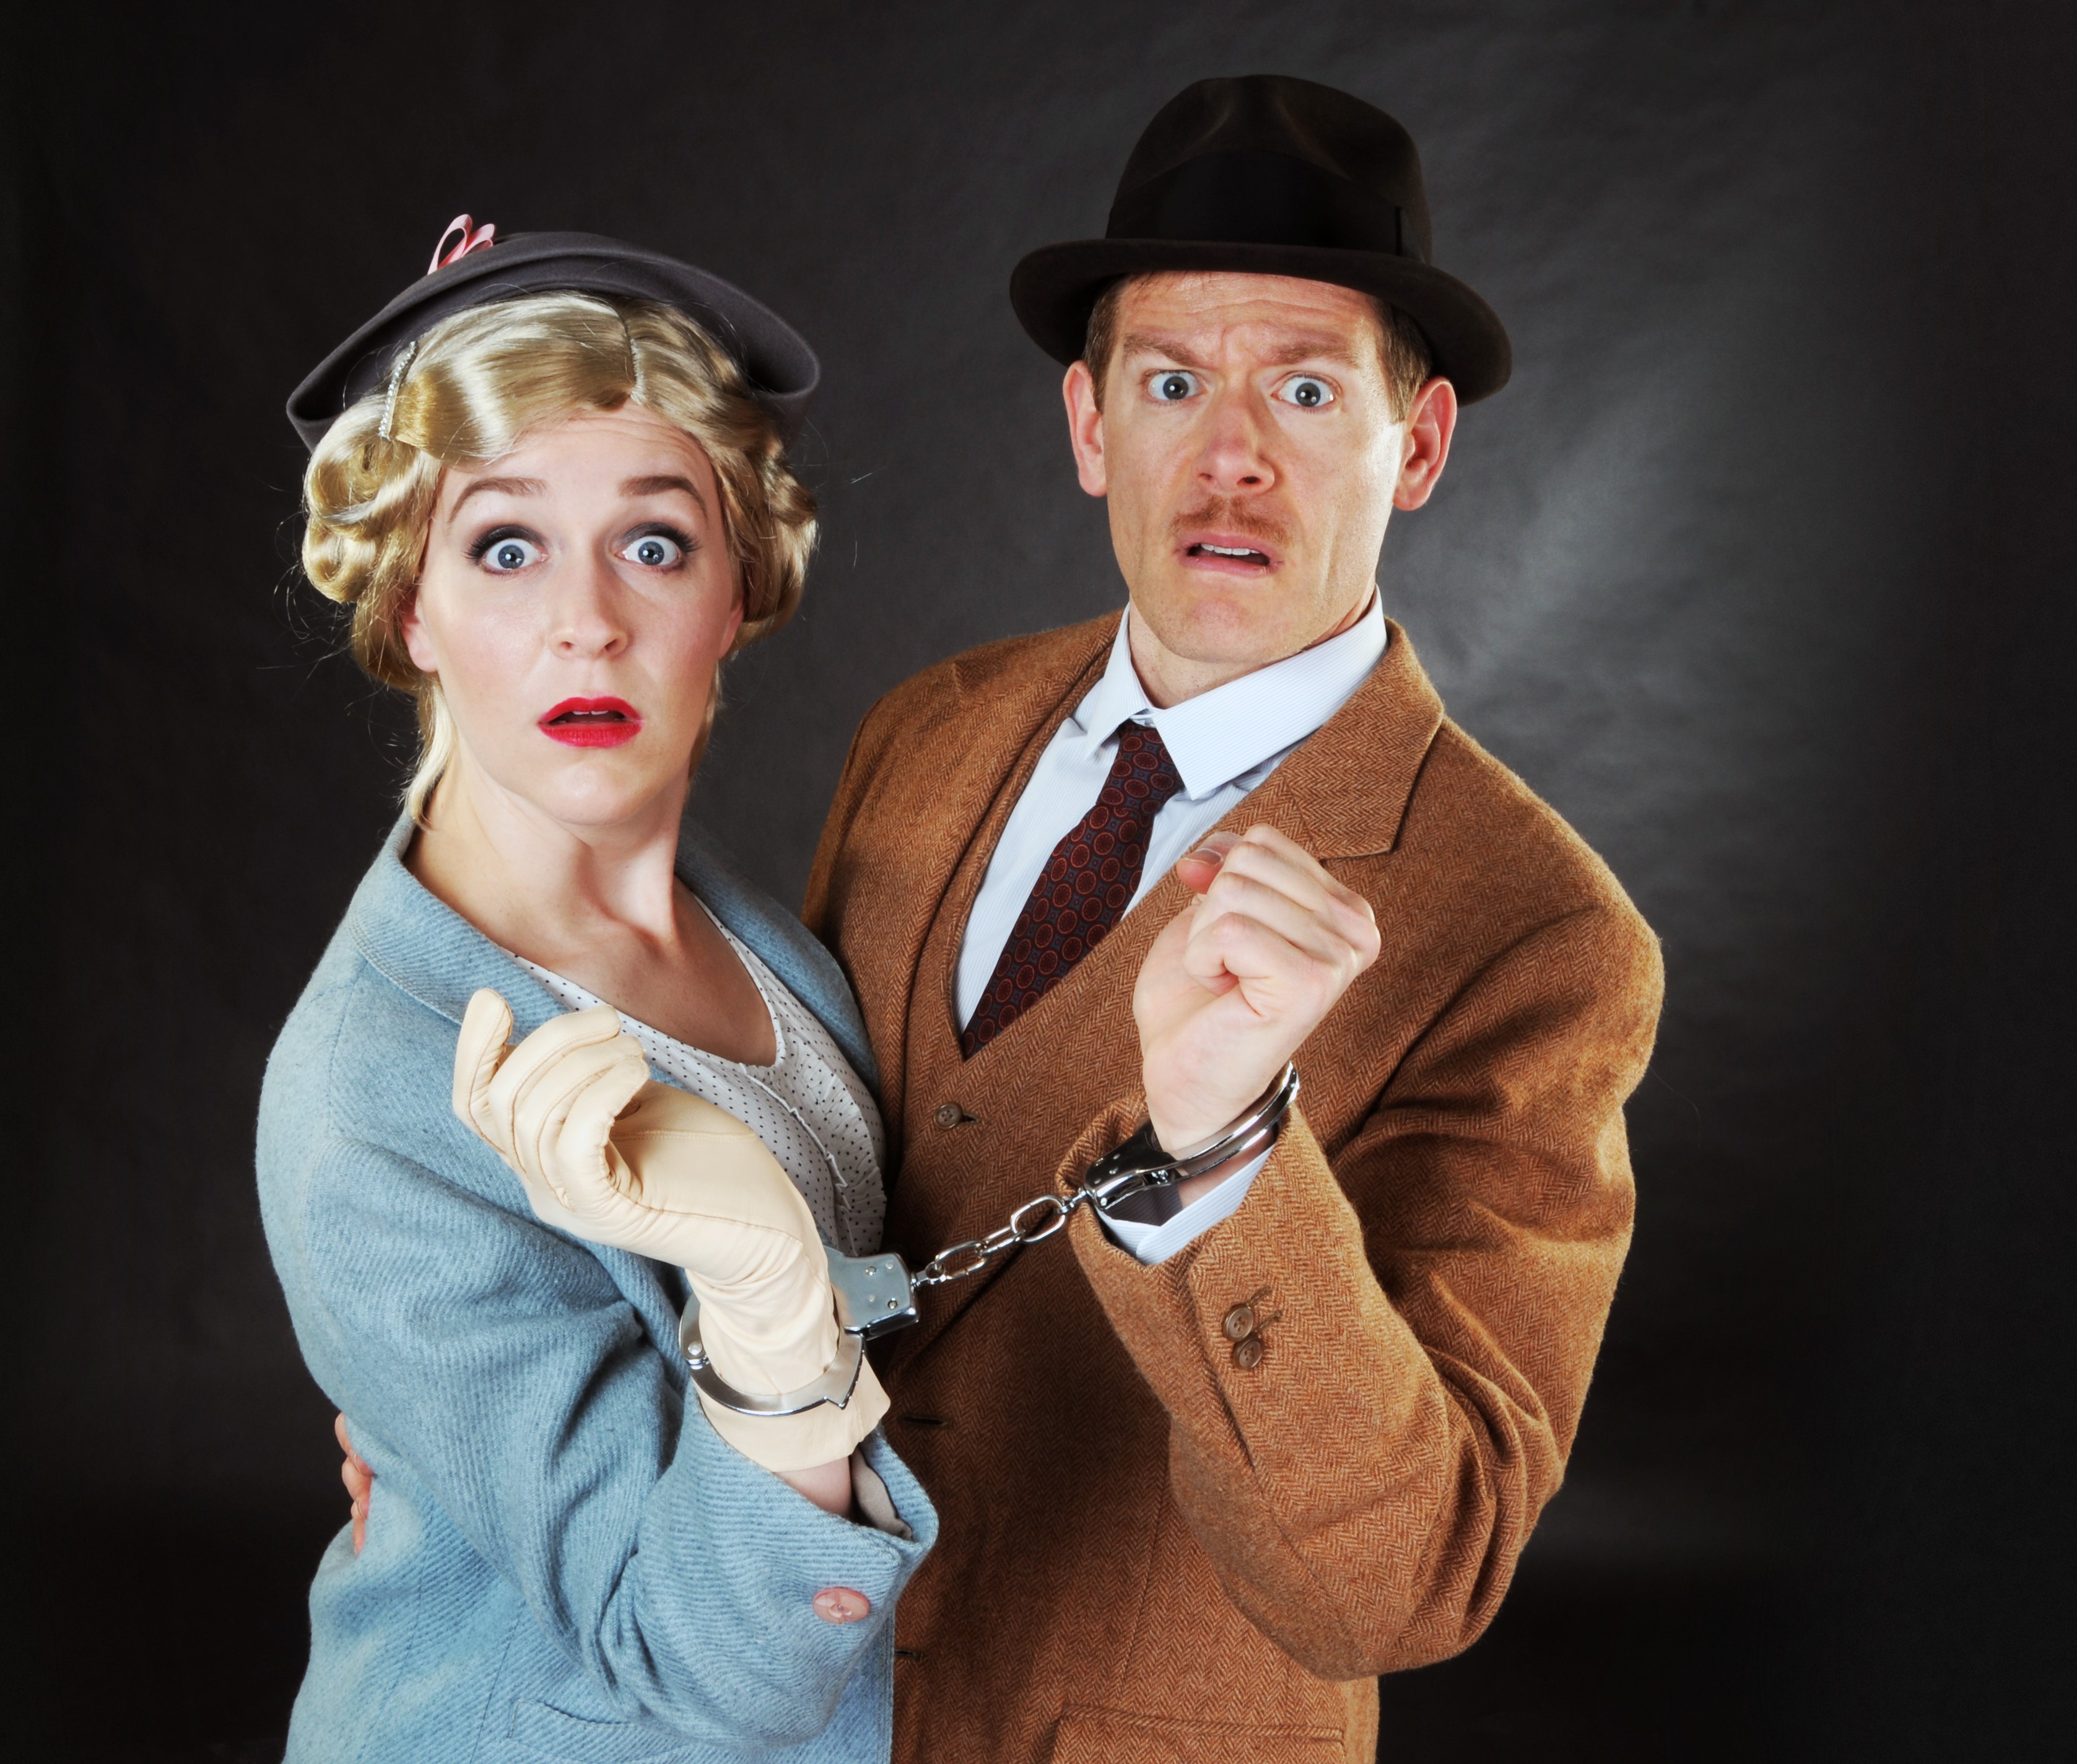  Megan Pickrell and Allan Snyder are bound for a strange adventure in "The 39 Steps."